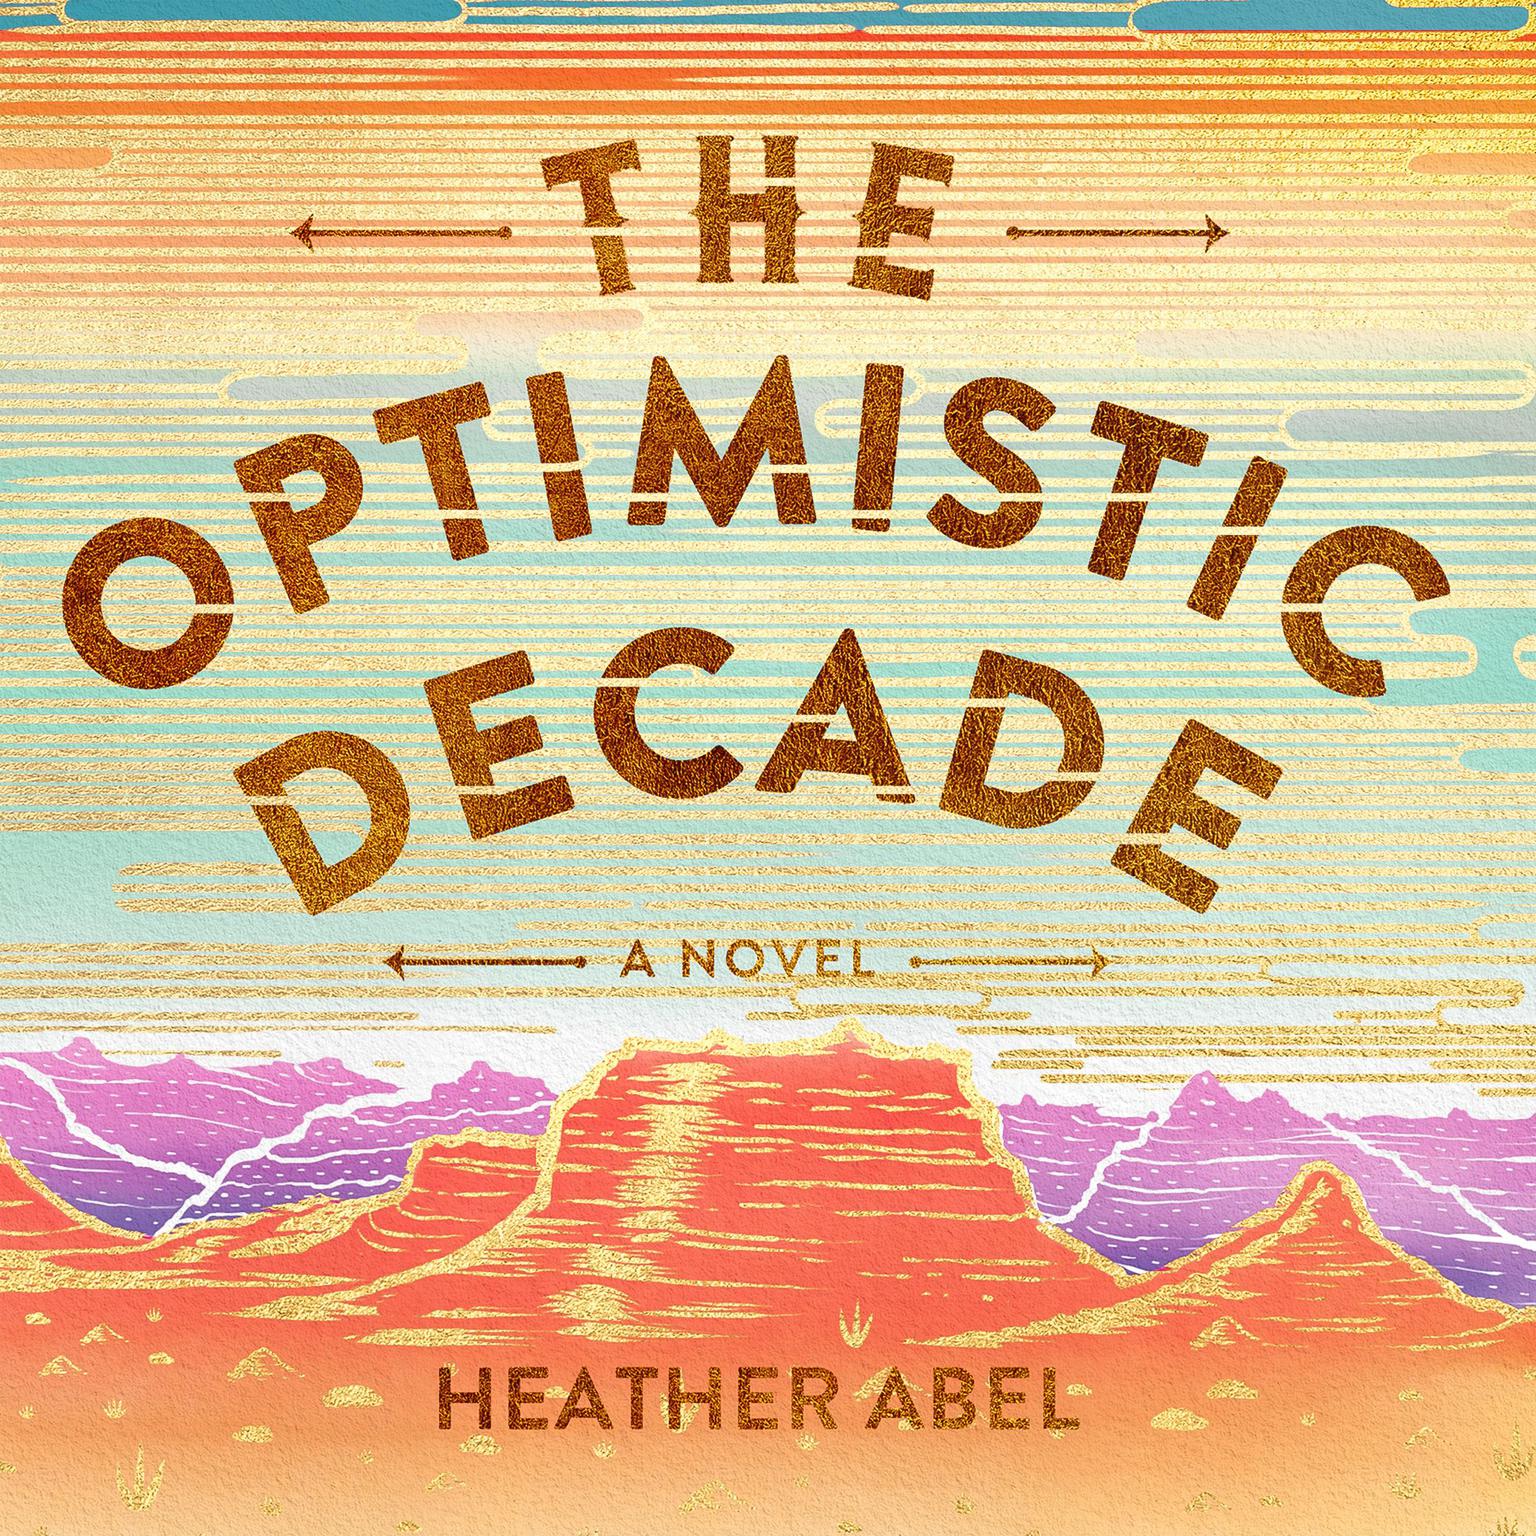 The Optimistic Decade Audiobook, by Heather Abel